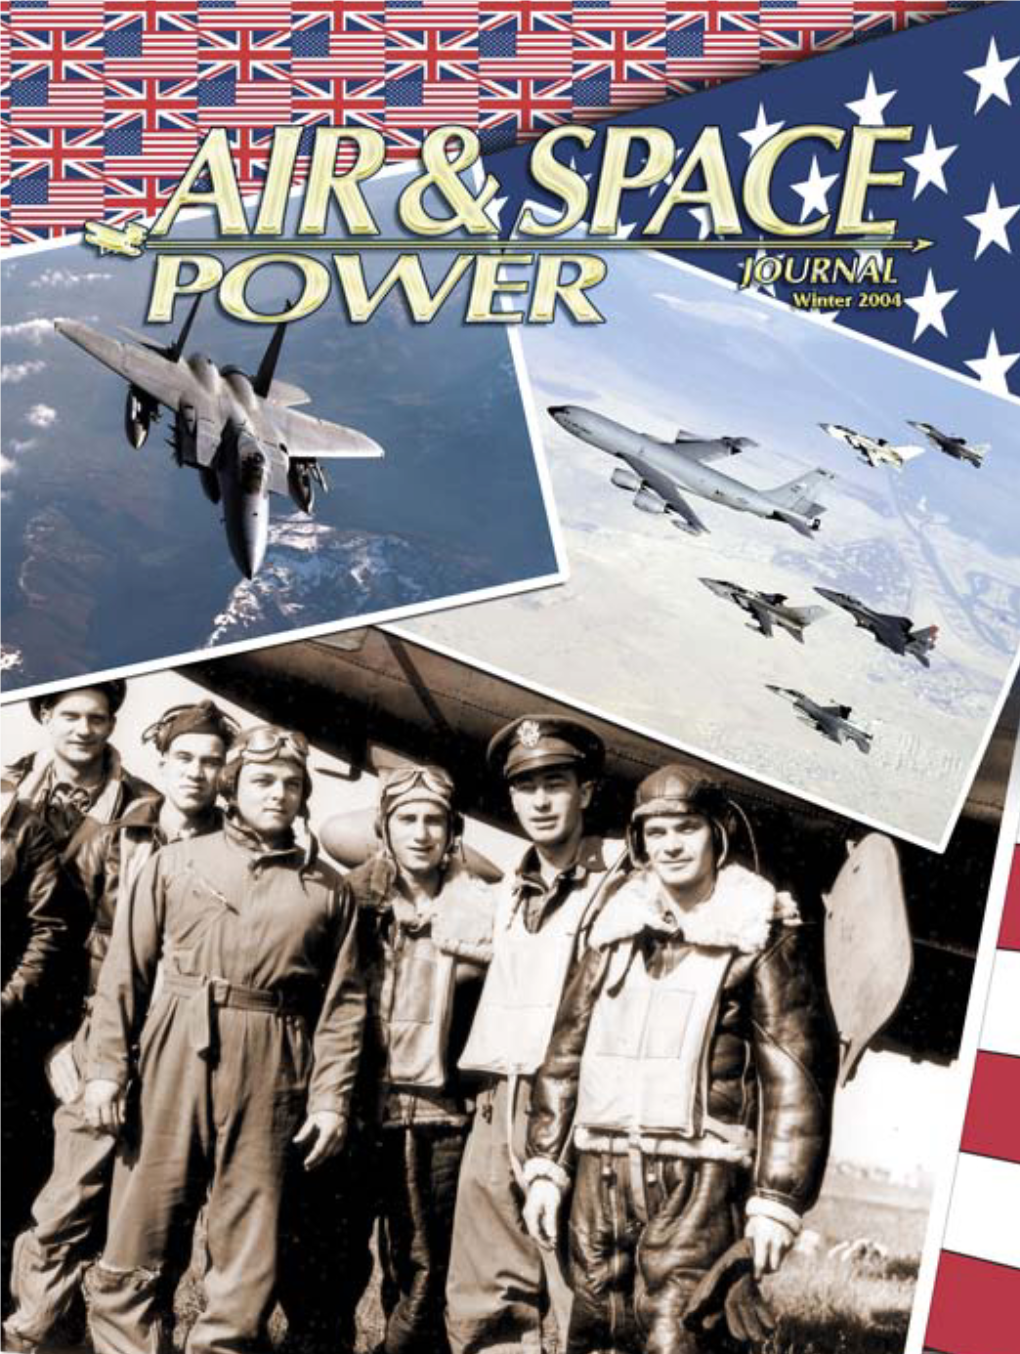 Air and Space Power Journal, Published Quarterly, Is the Professional Flagship Publication of the United States Air Force